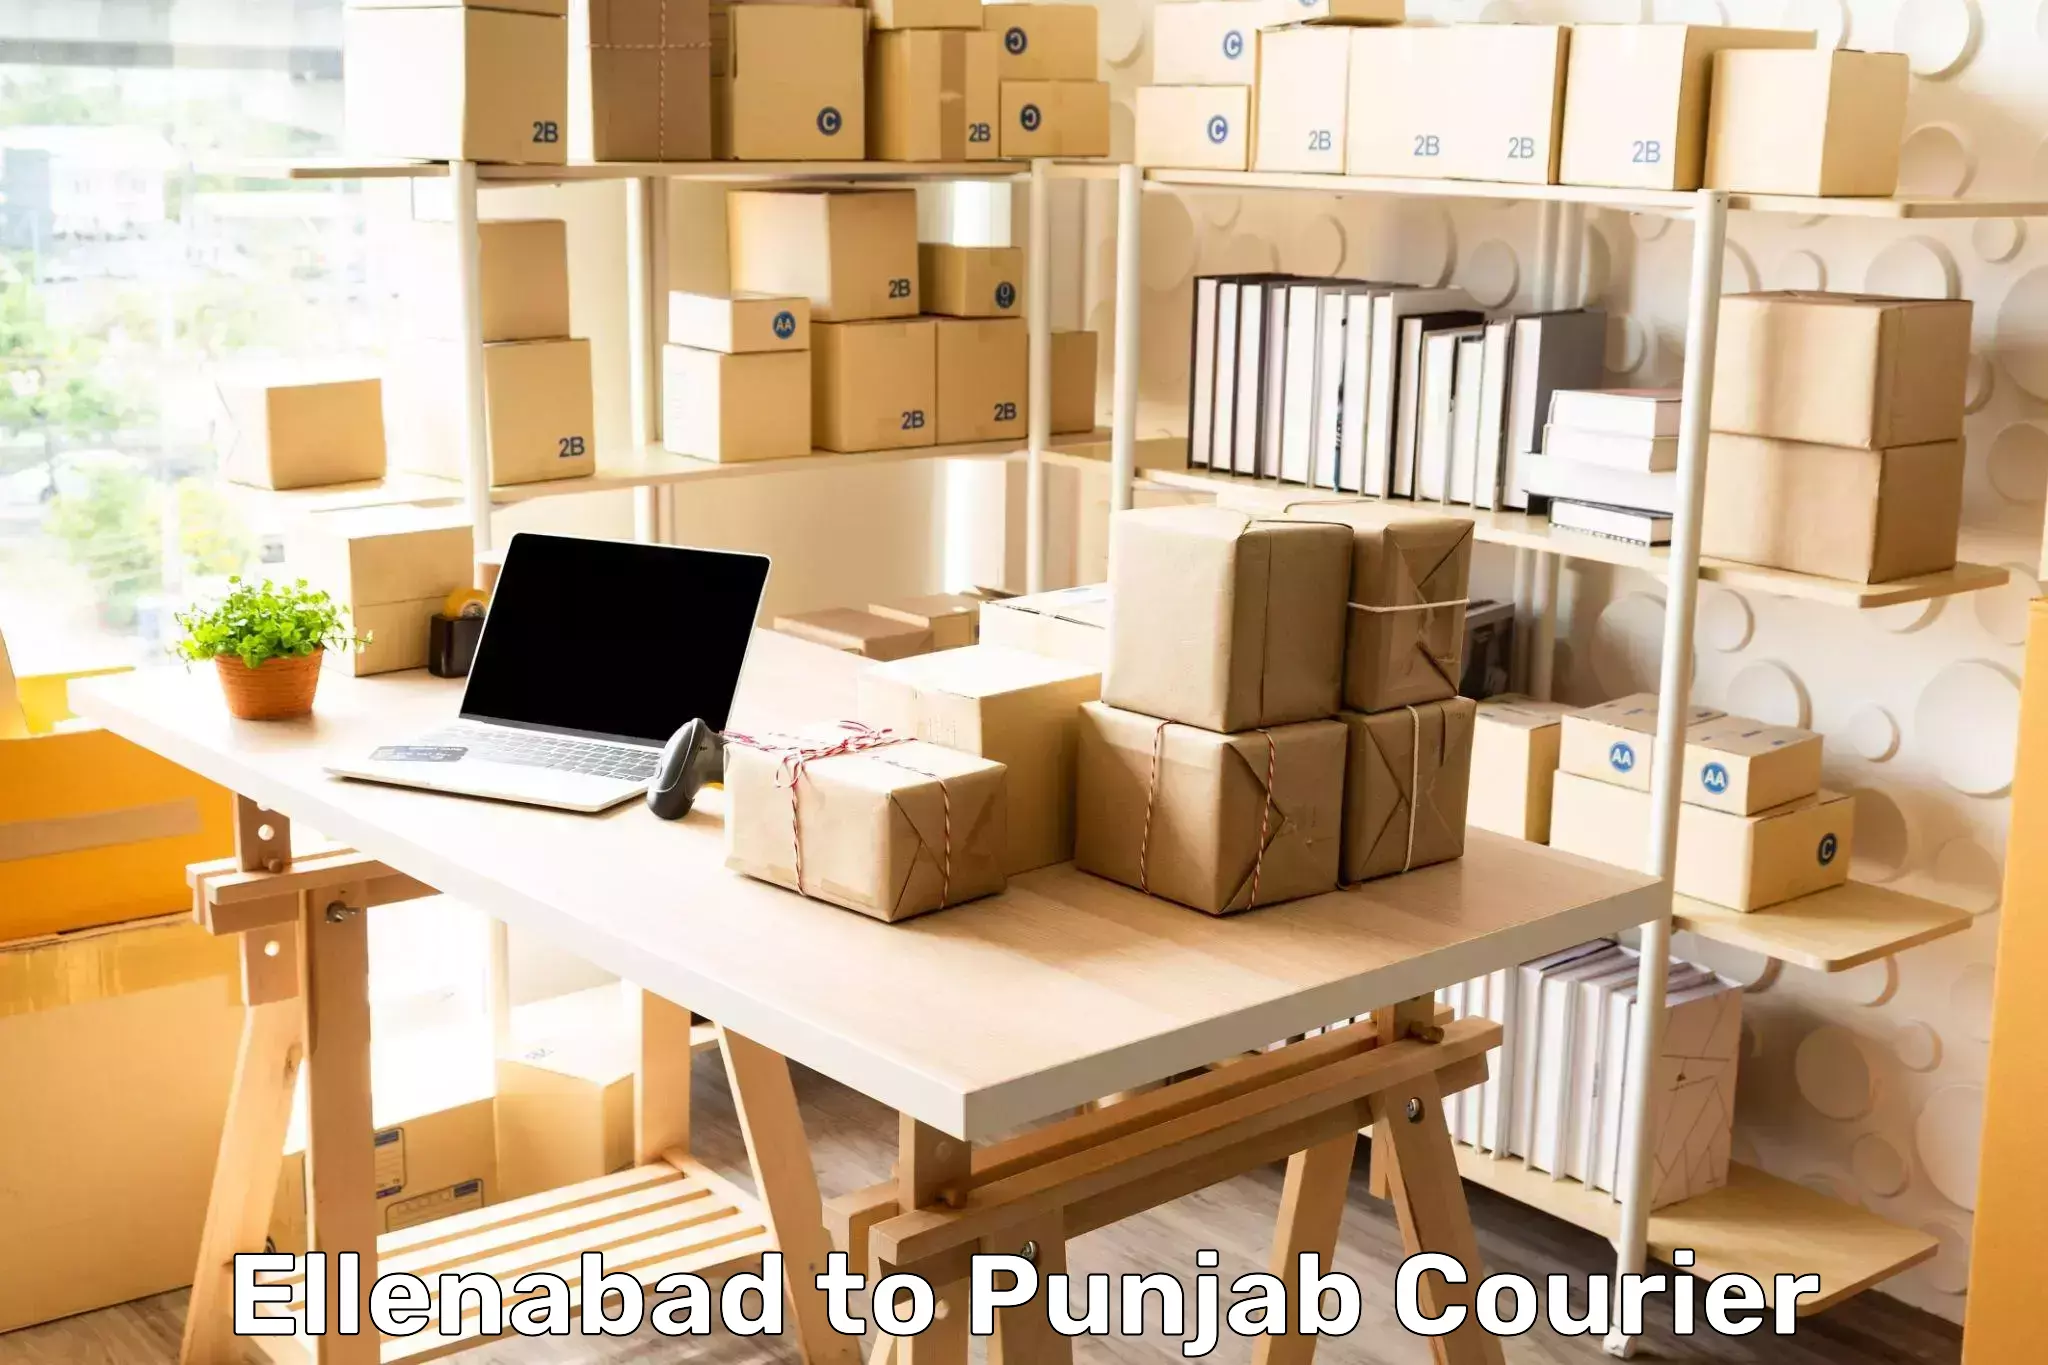 Same-day delivery solutions Ellenabad to Punjab